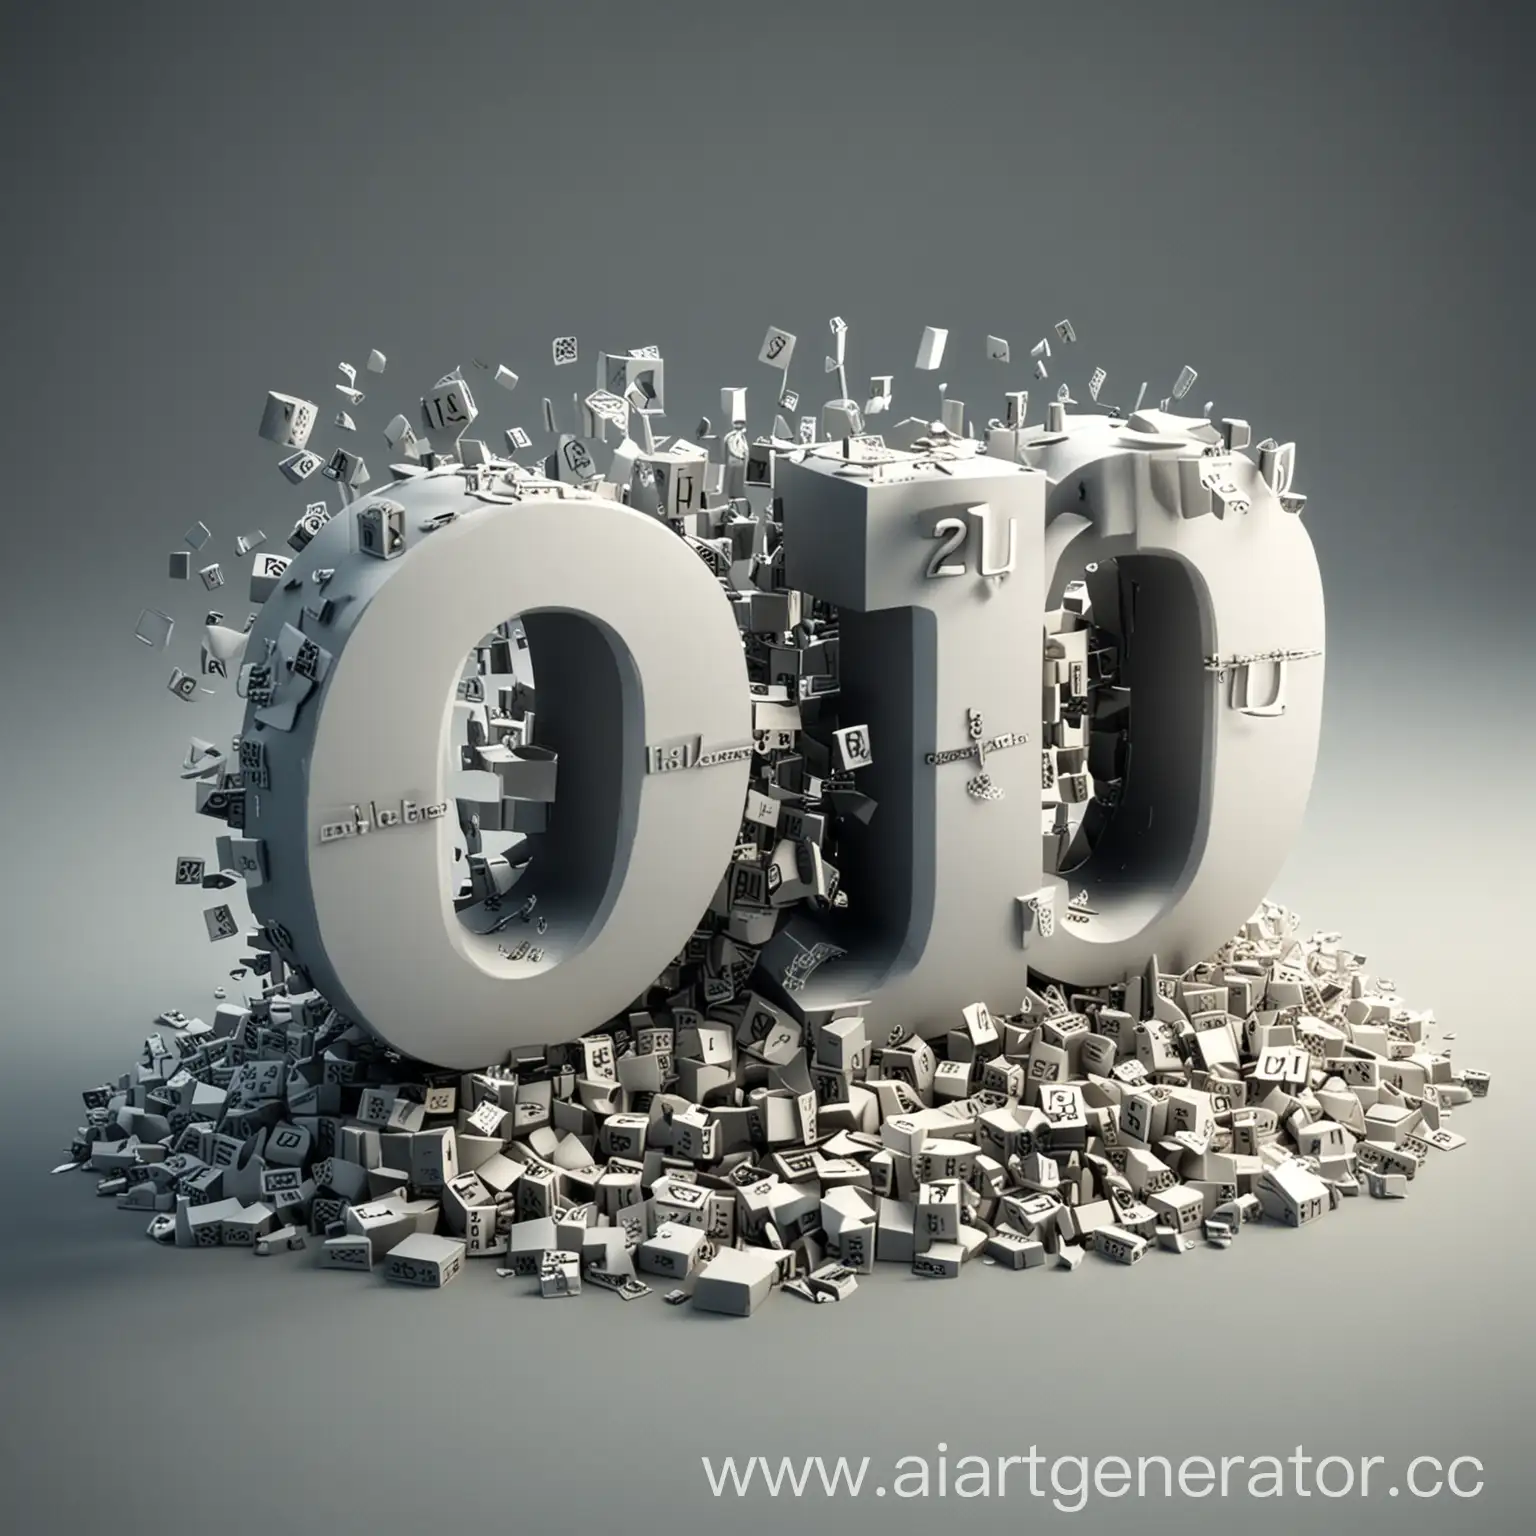 Vibrant-3D-Artwork-with-Dynamic-Typography-Displaying-3D-2U